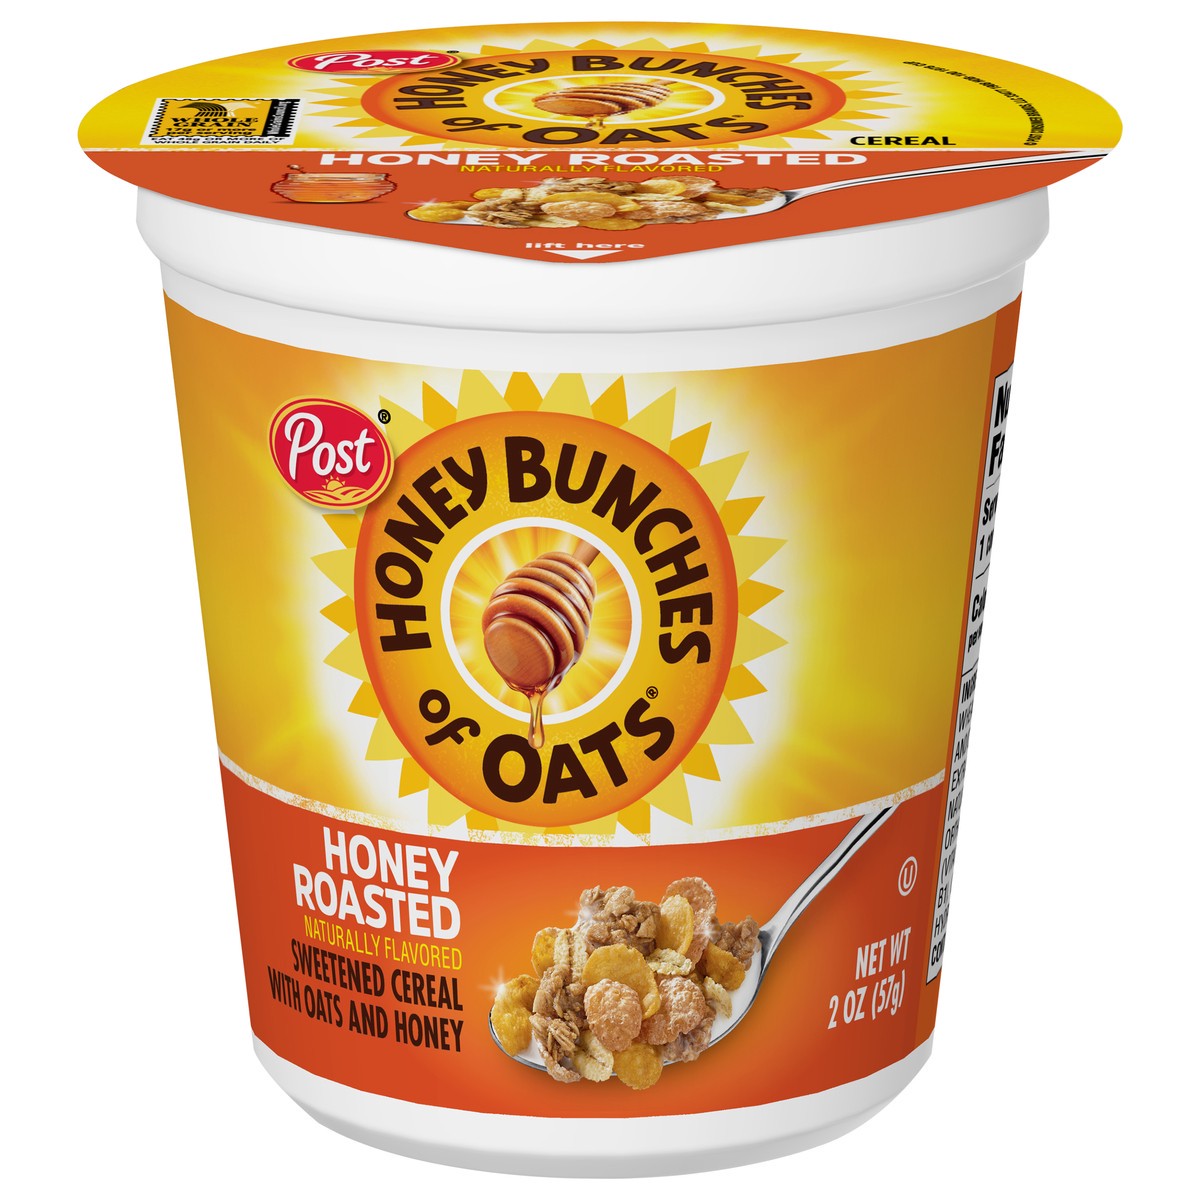 slide 11 of 11, Post Honey Bunches of Oats Honey Roasted Breakfast Cereal, 2 OZ Cereal Cup, 2 oz